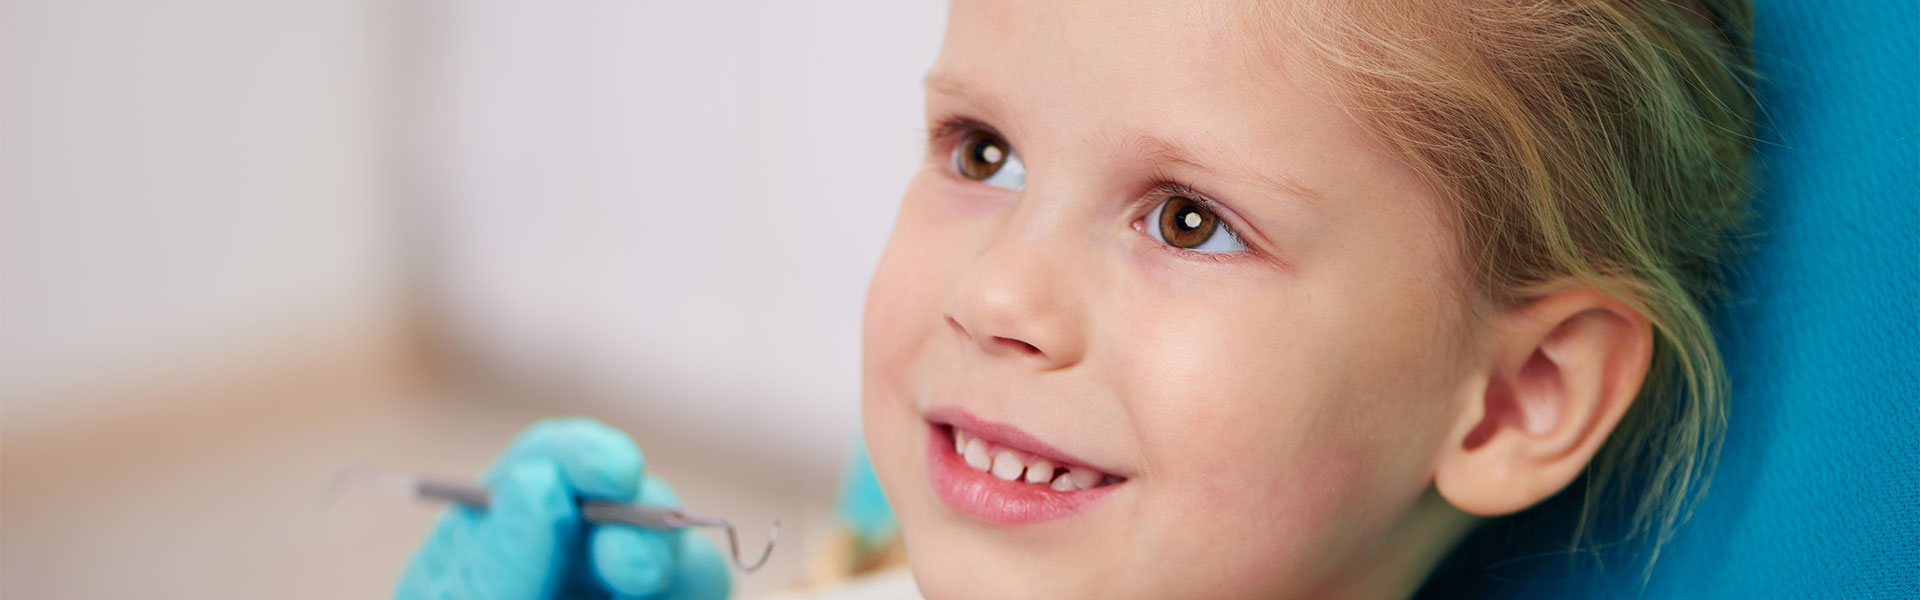 When Should Your Child Have Their First Dental Visit?